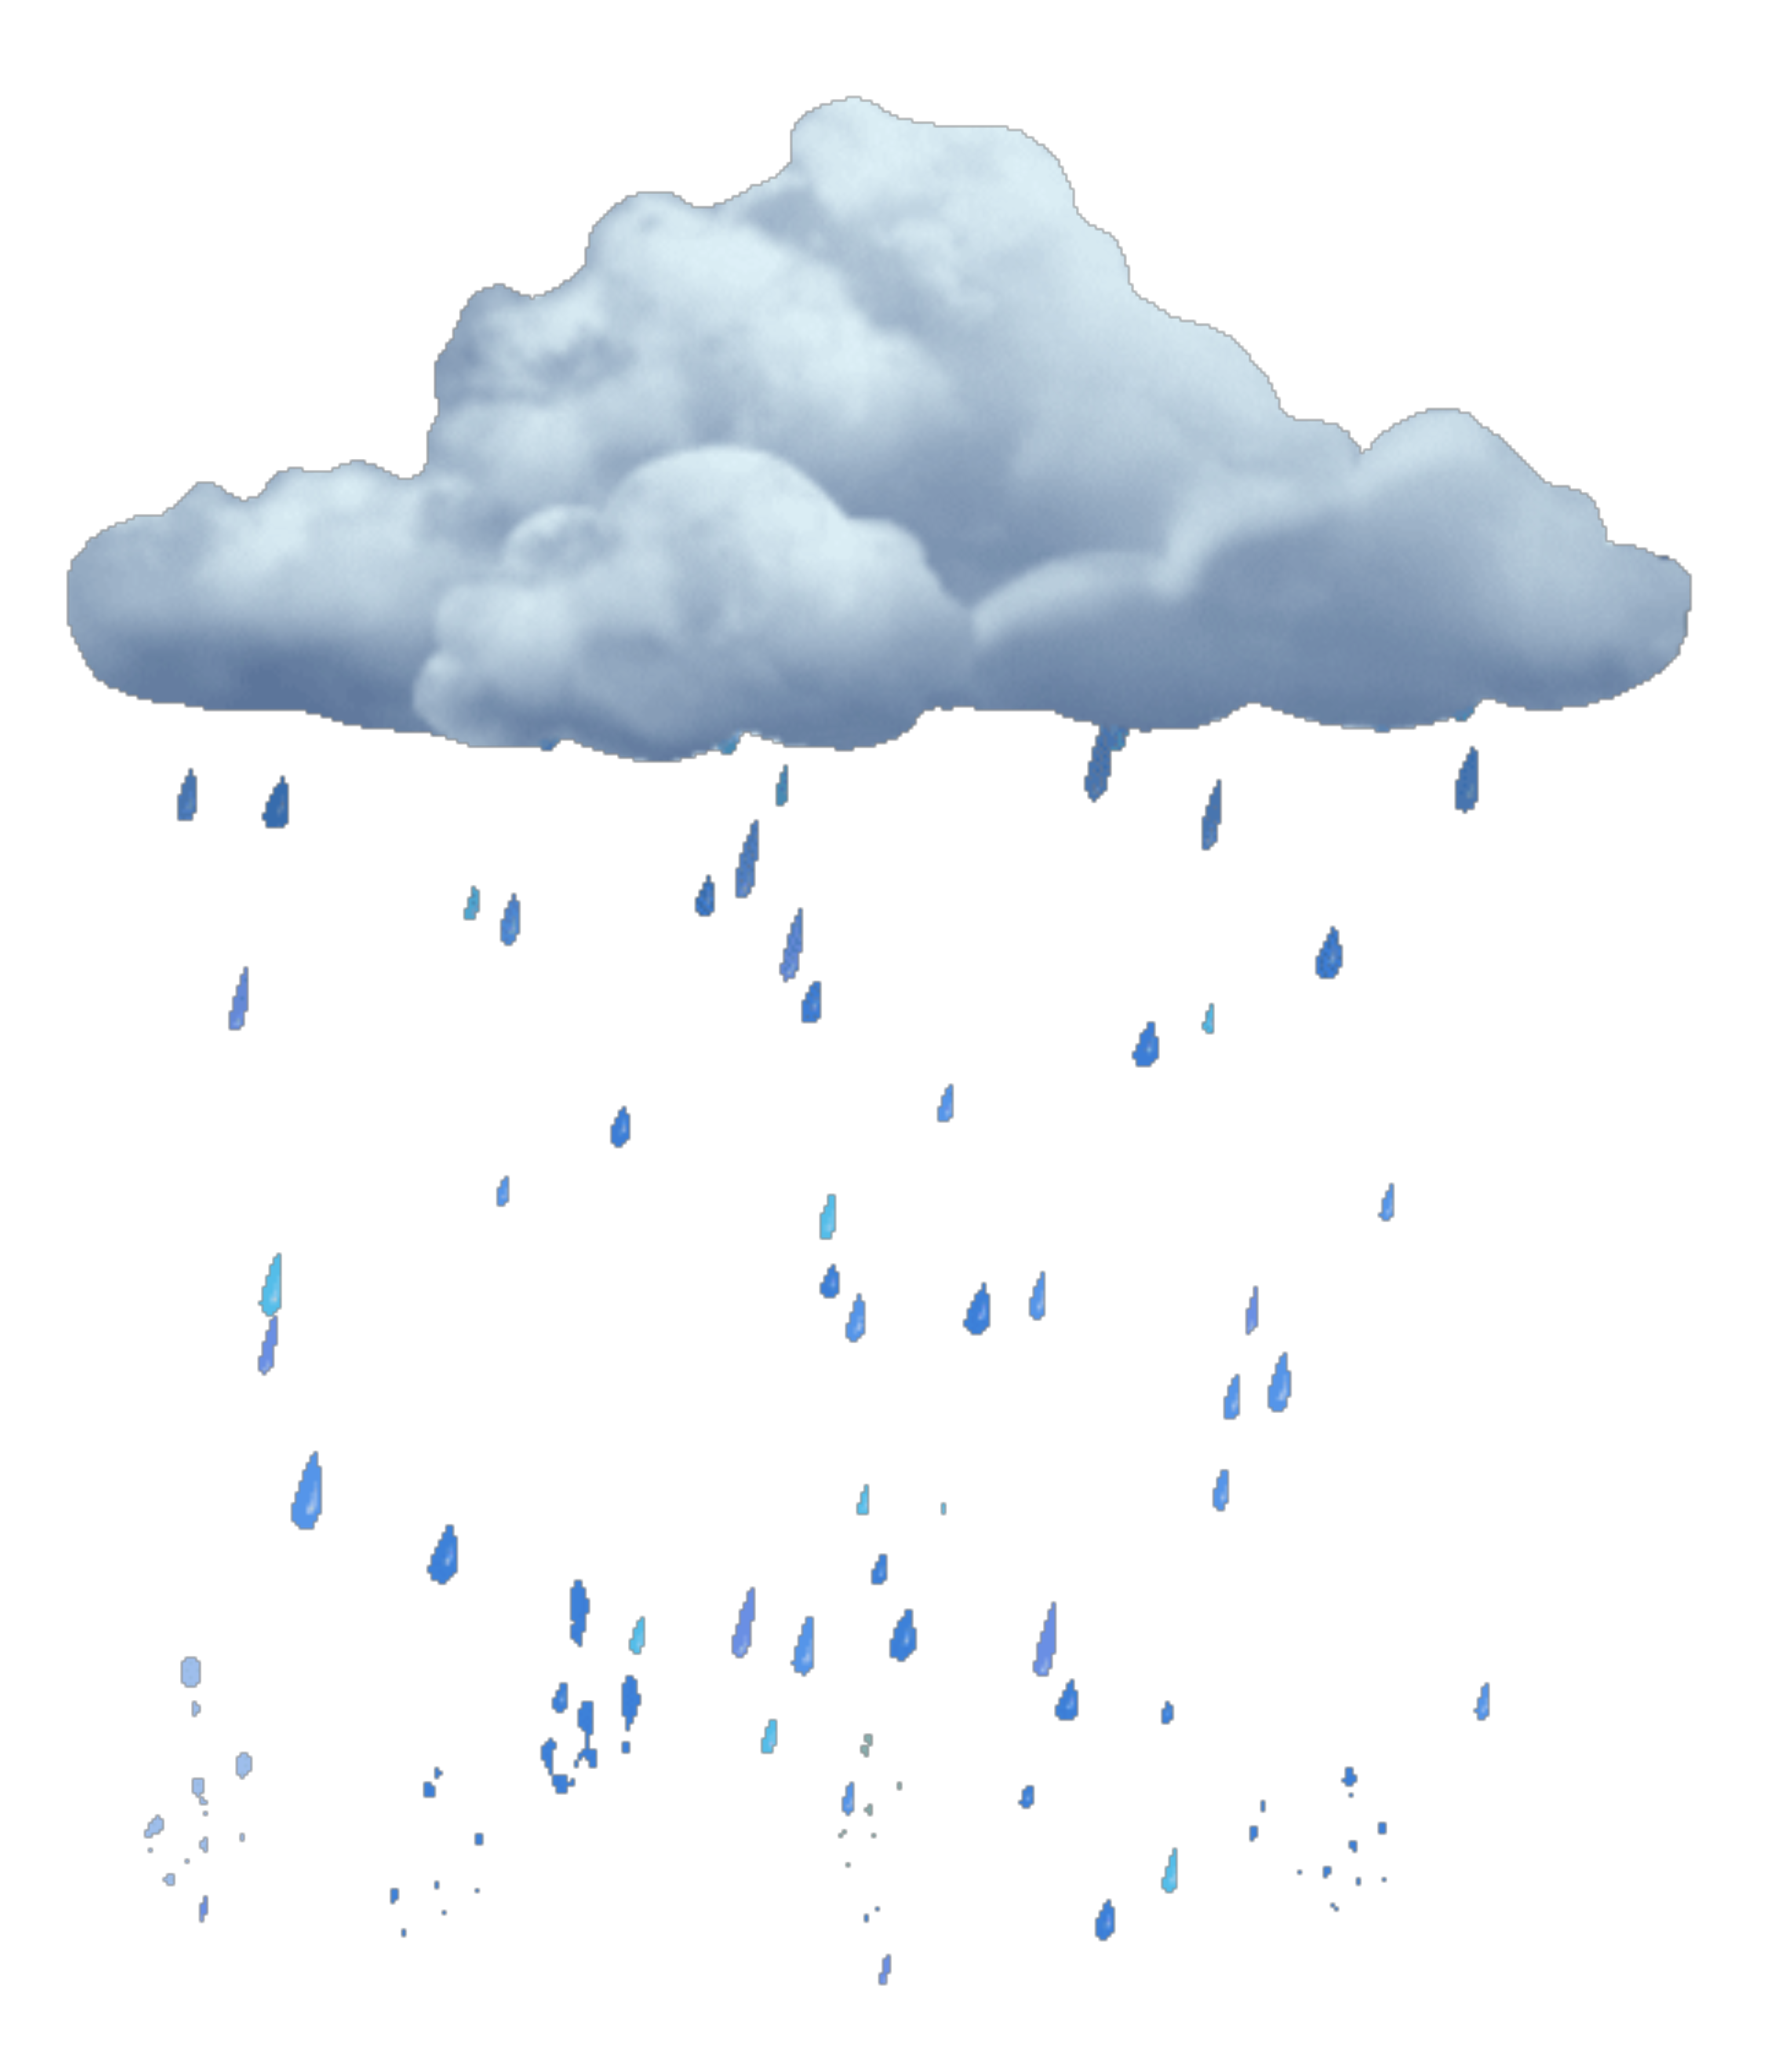 Rain Cloud Clipart Aesthetic and other clipart images on Cliparts pub ™.